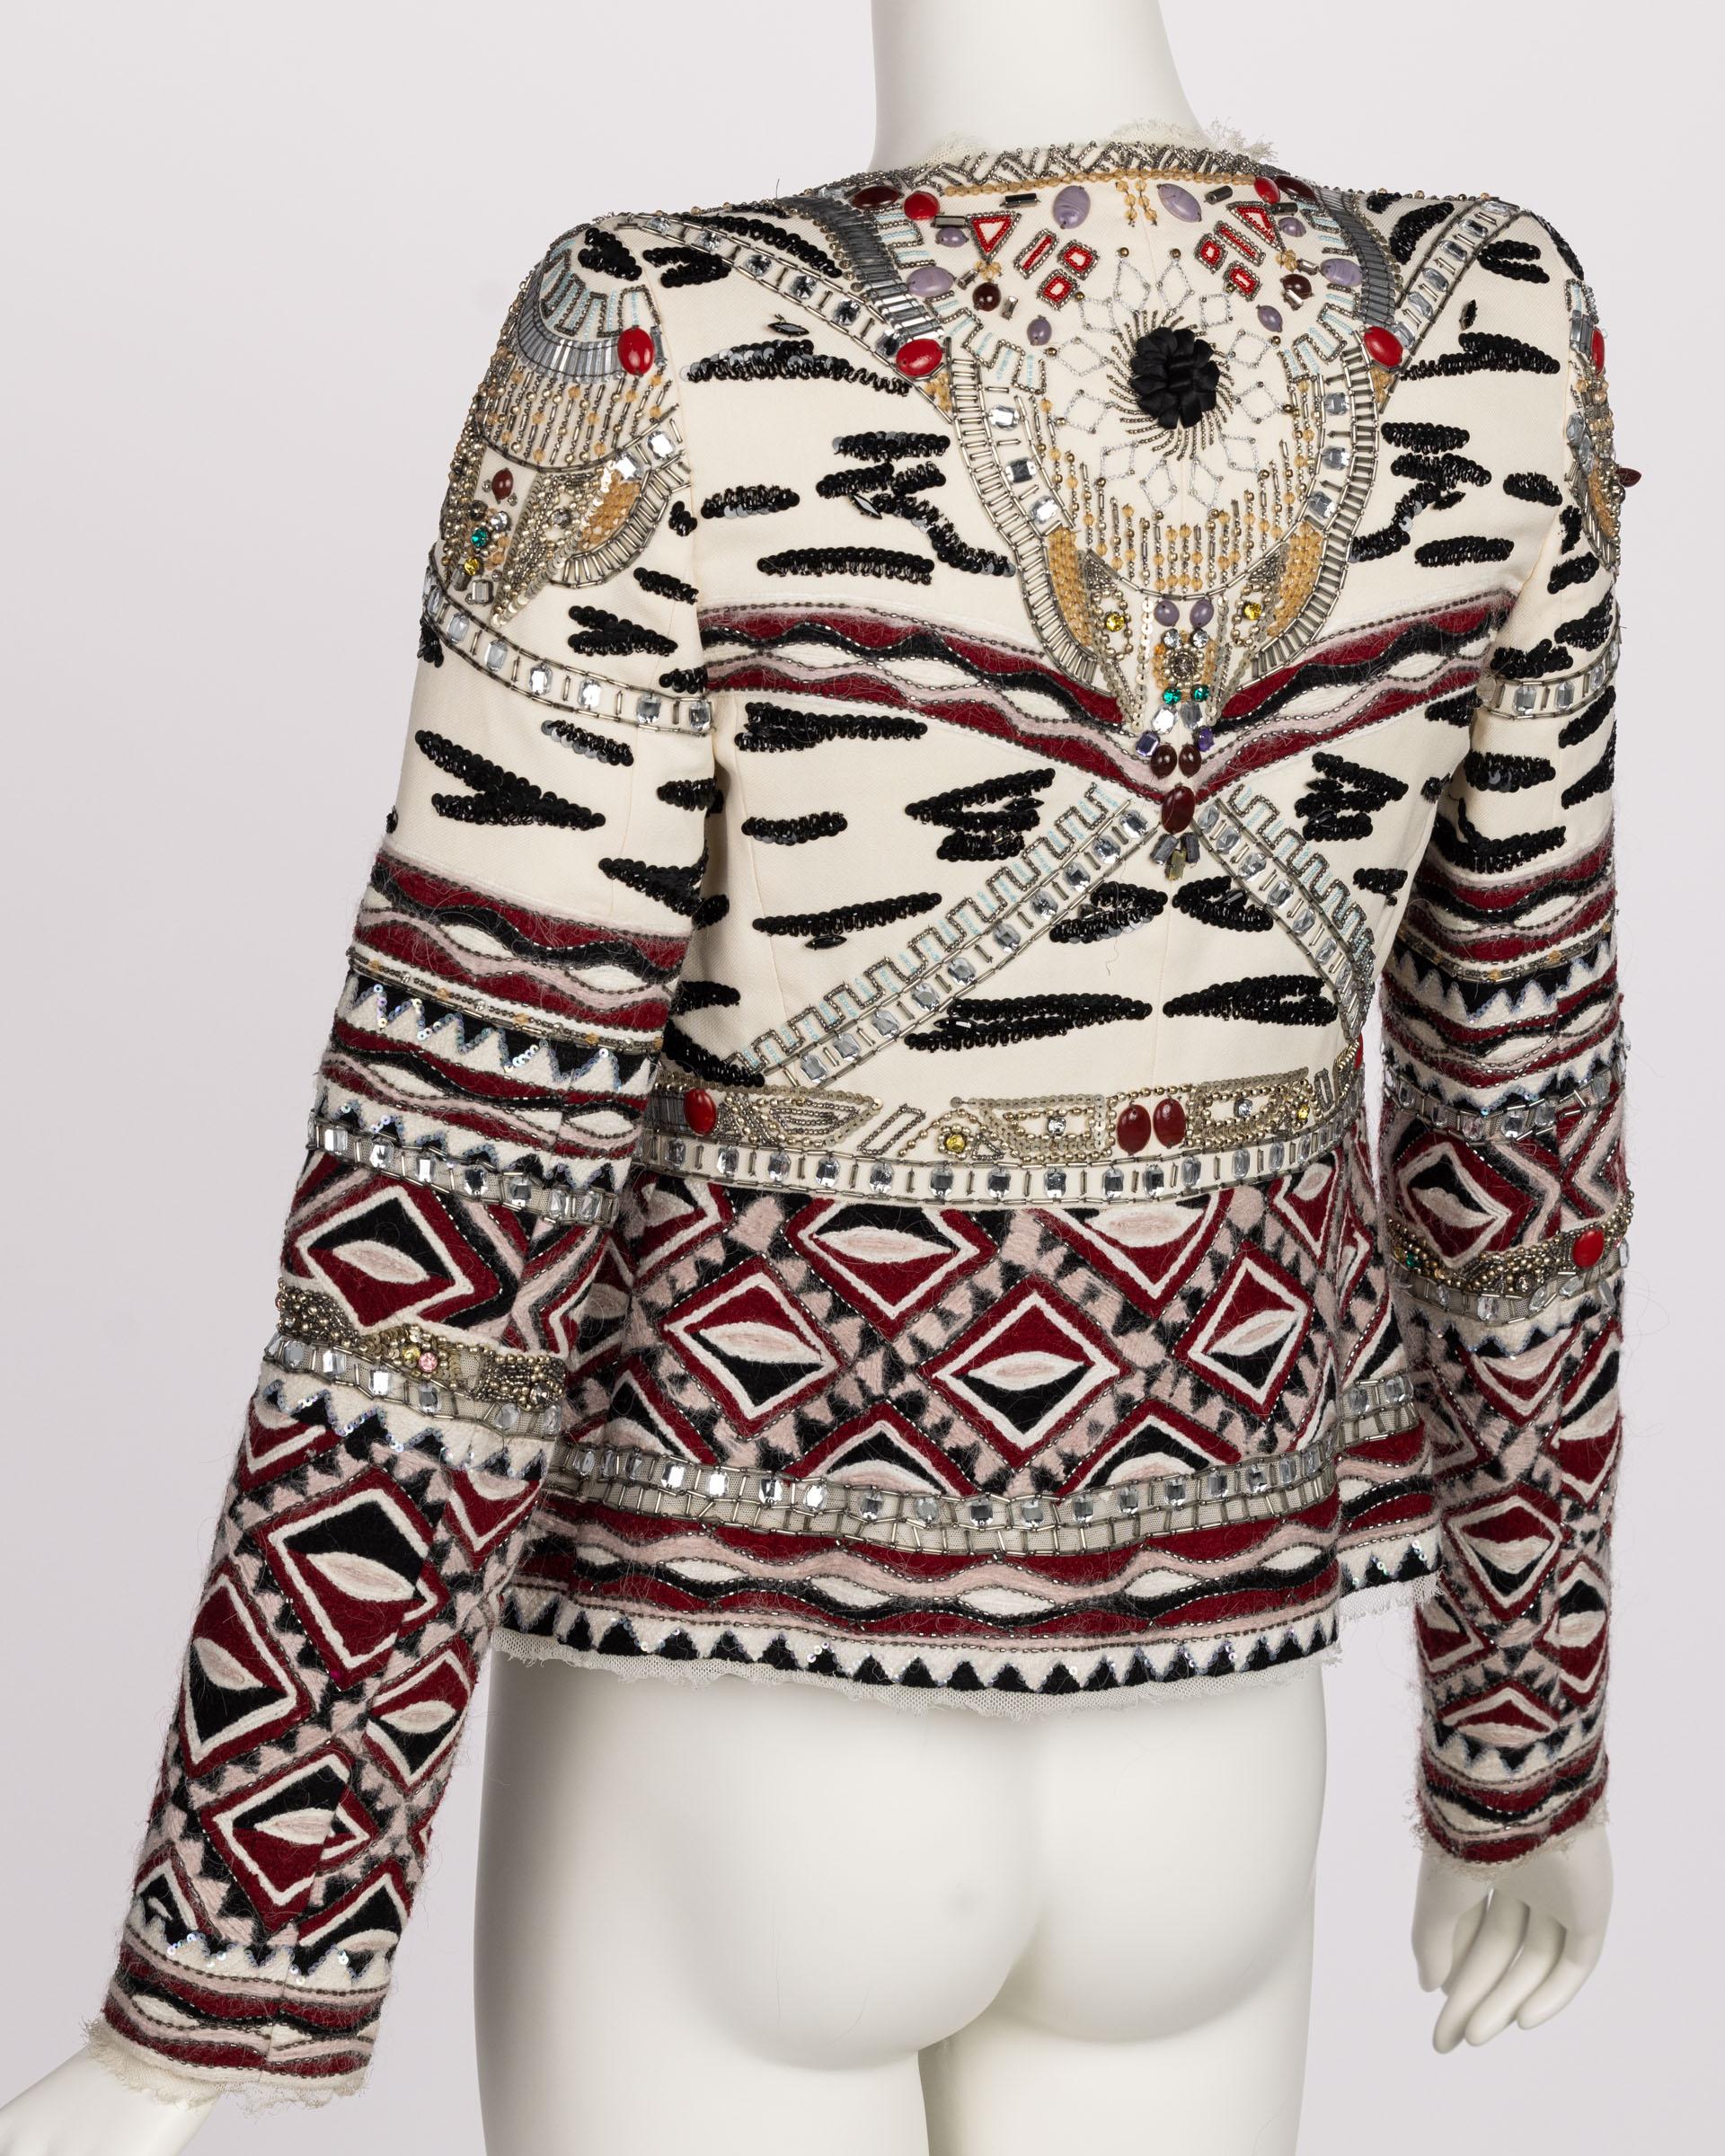  Emilio Pucci Embellished Wool Silk & Cotton Blend Jacket, Pre -Fall 2012 Runway In Excellent Condition In Boca Raton, FL